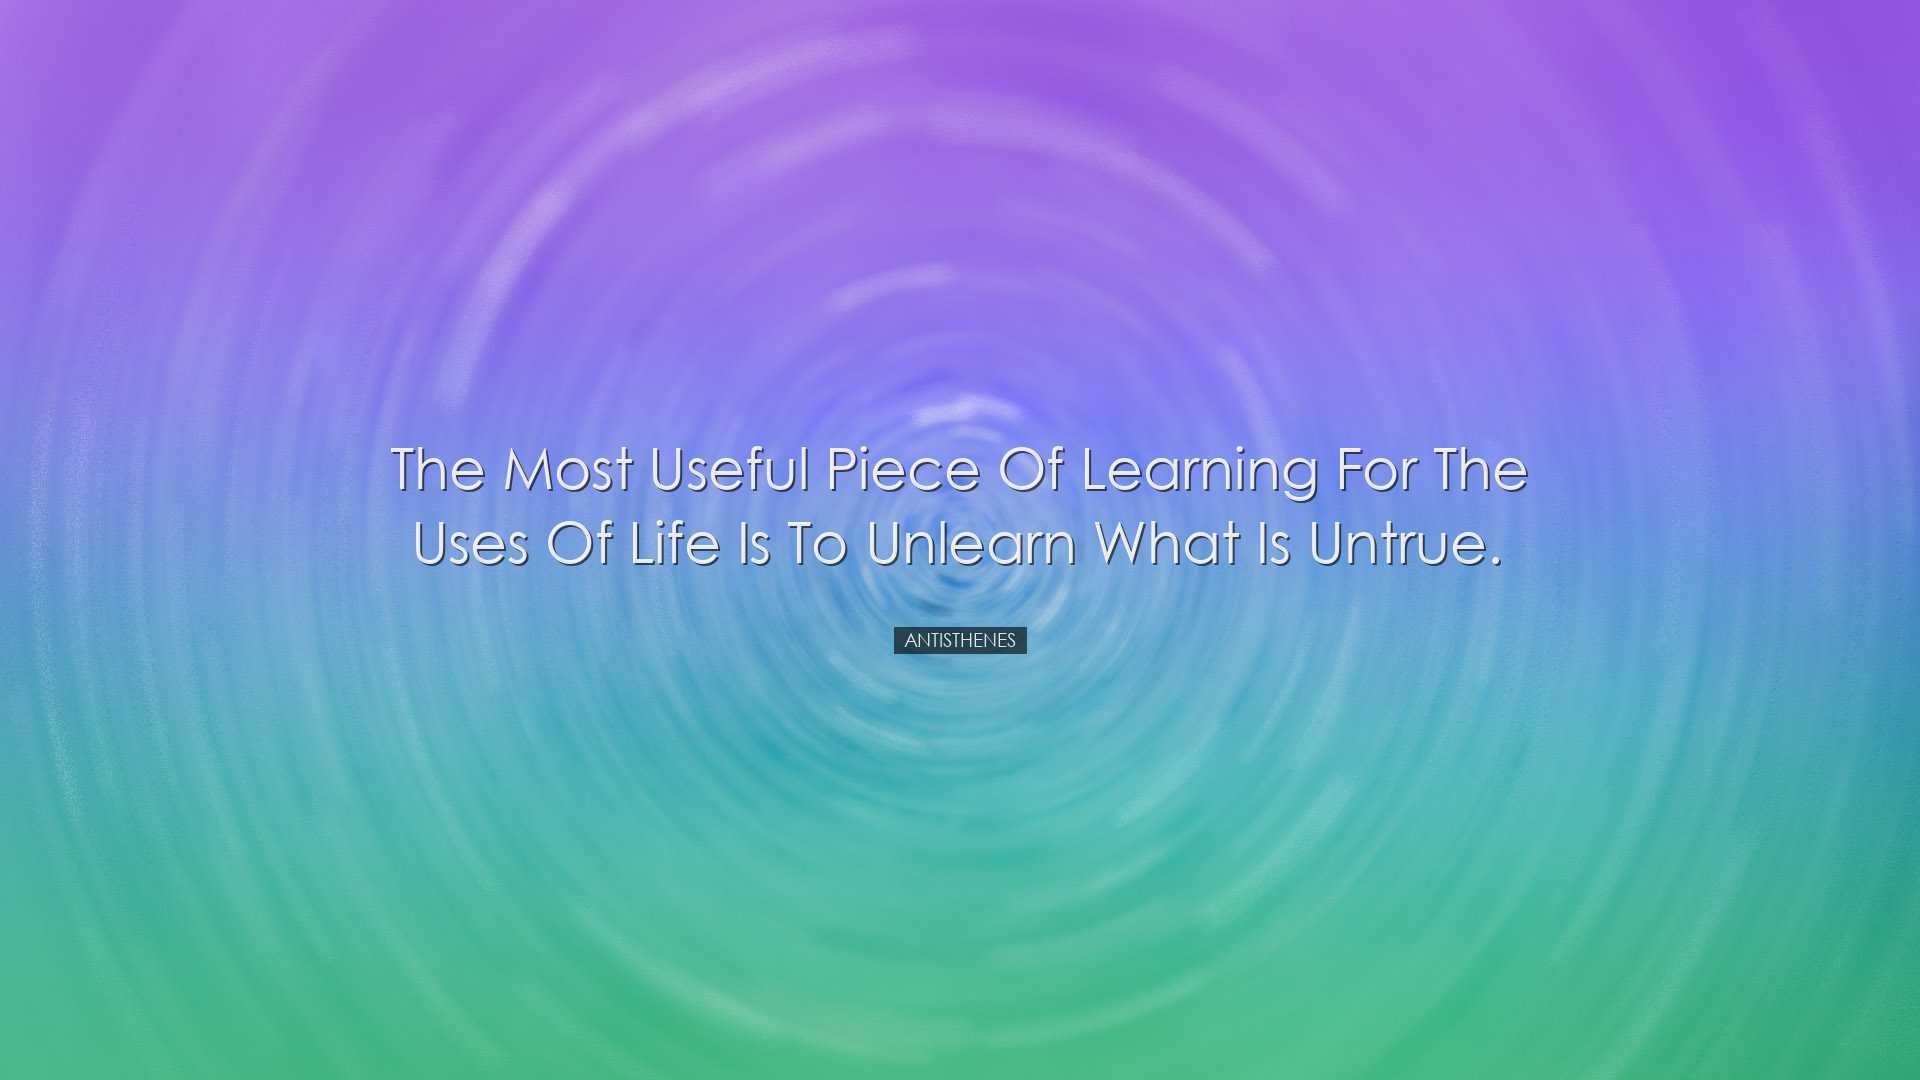 The most useful piece of learning for the uses of life is to unlea